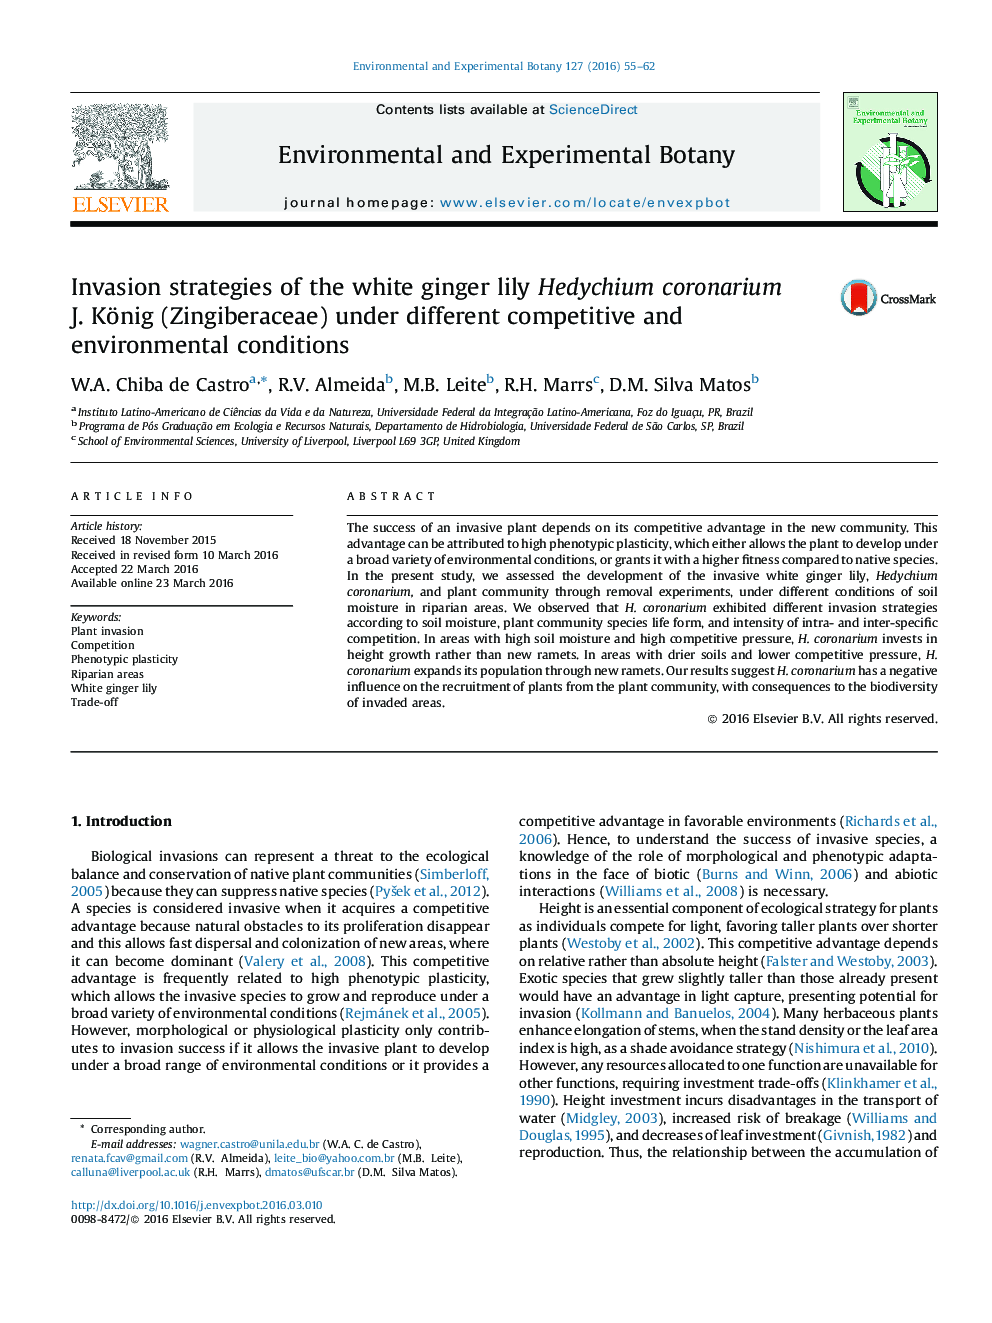 Invasion strategies of the white ginger lily Hedychium coronarium J. König (Zingiberaceae) under different competitive and environmental conditions